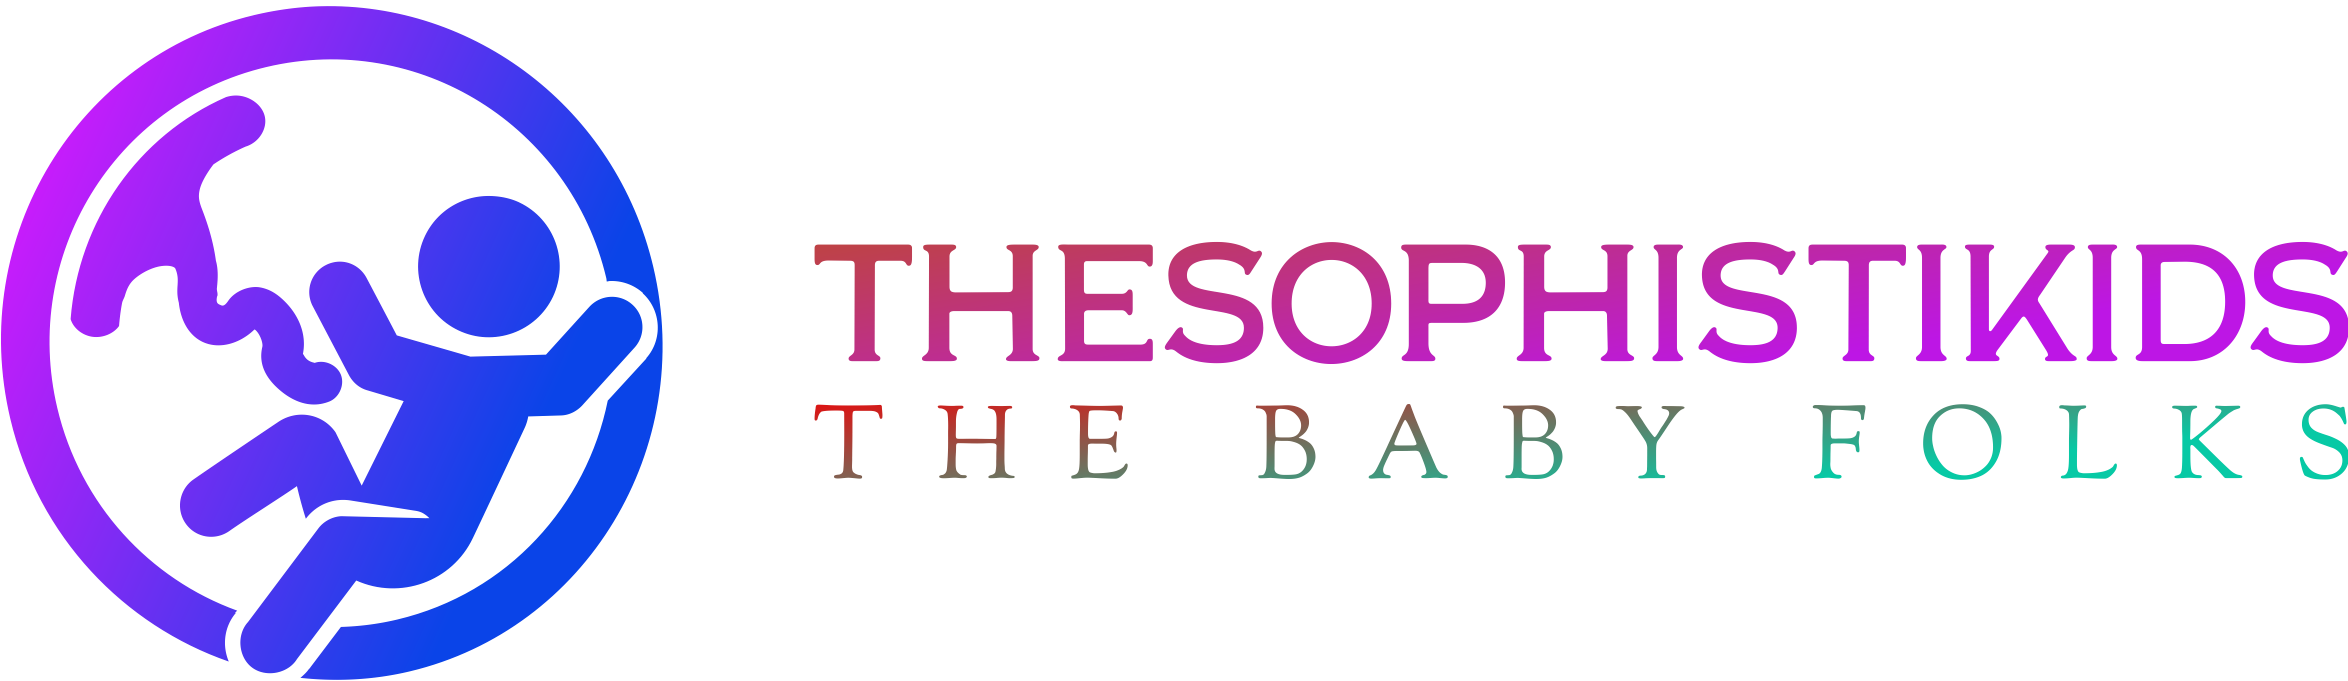 Thesophistikids